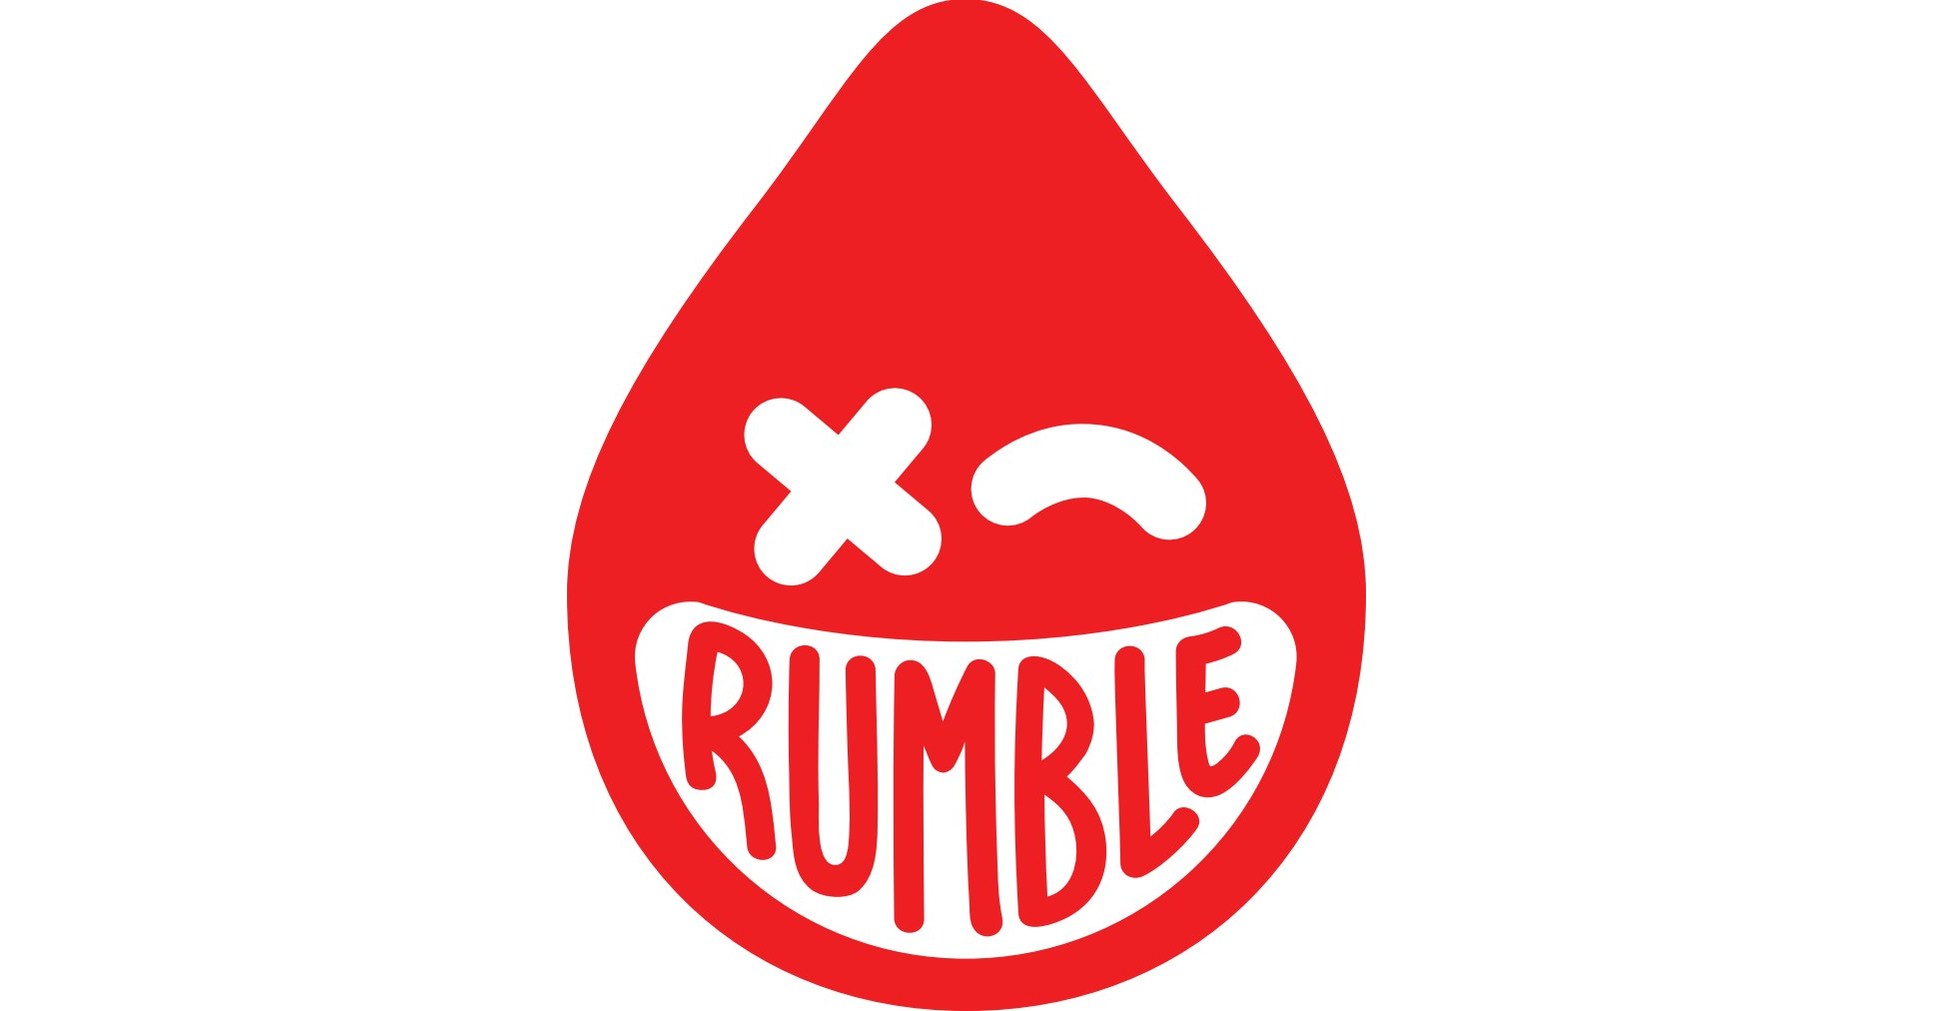 Rumble on Oct 23rd at 11:30am ET